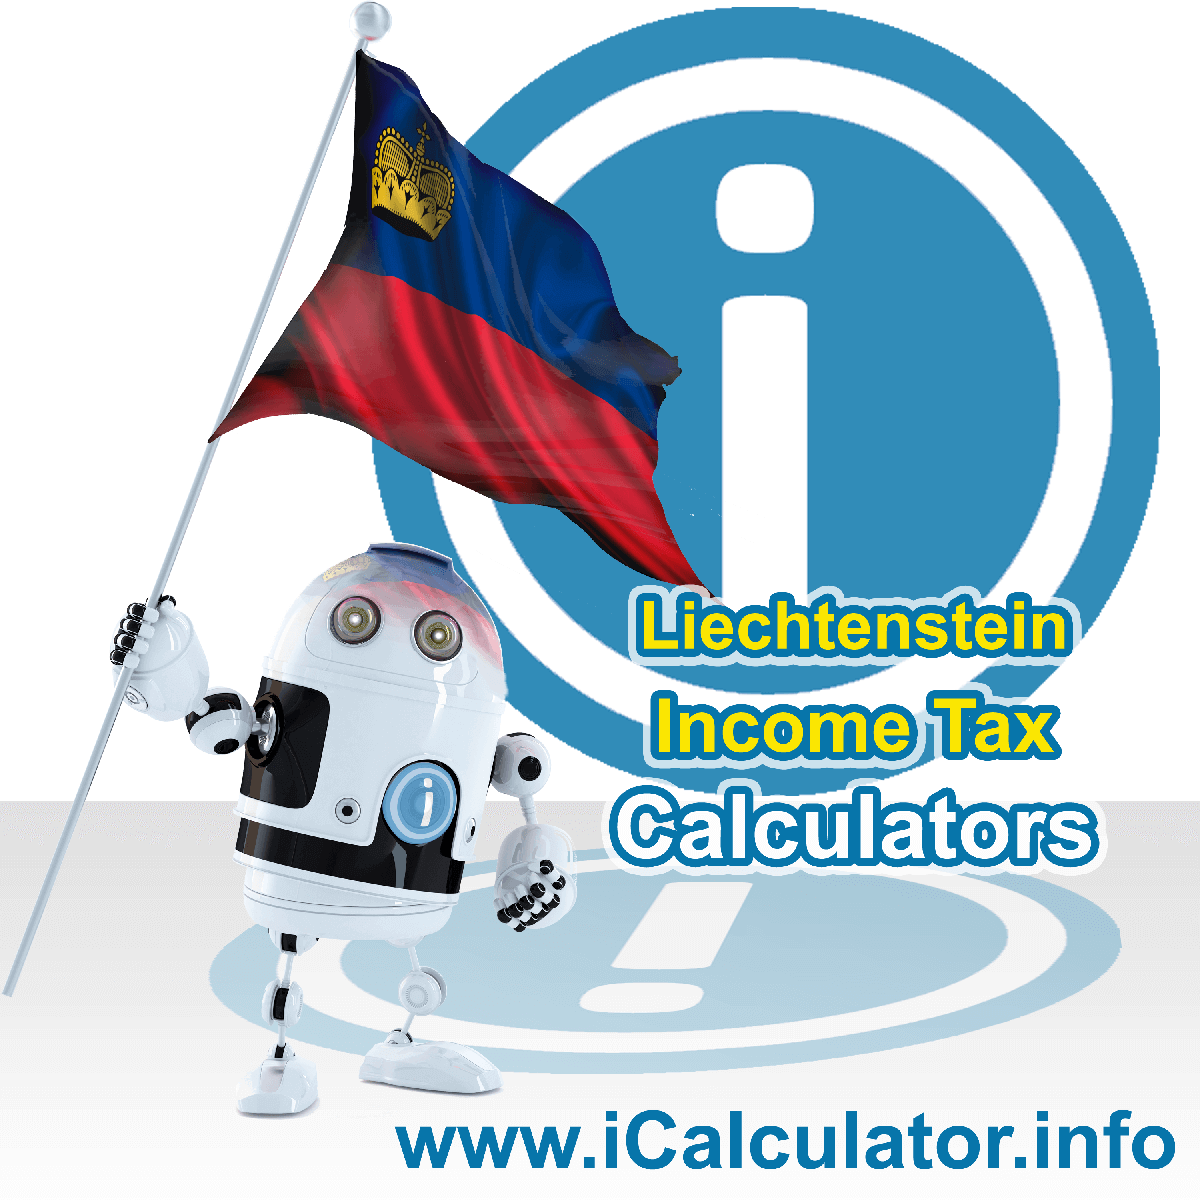 Liechtenstein Income Tax Calculator. This image shows a new employer in Liechtenstein calculating the annual payroll costs based on multiple payroll payments in one year in Liechtenstein using the Liechtenstein income tax calculator to understand their payroll costs in Liechtenstein in 2023